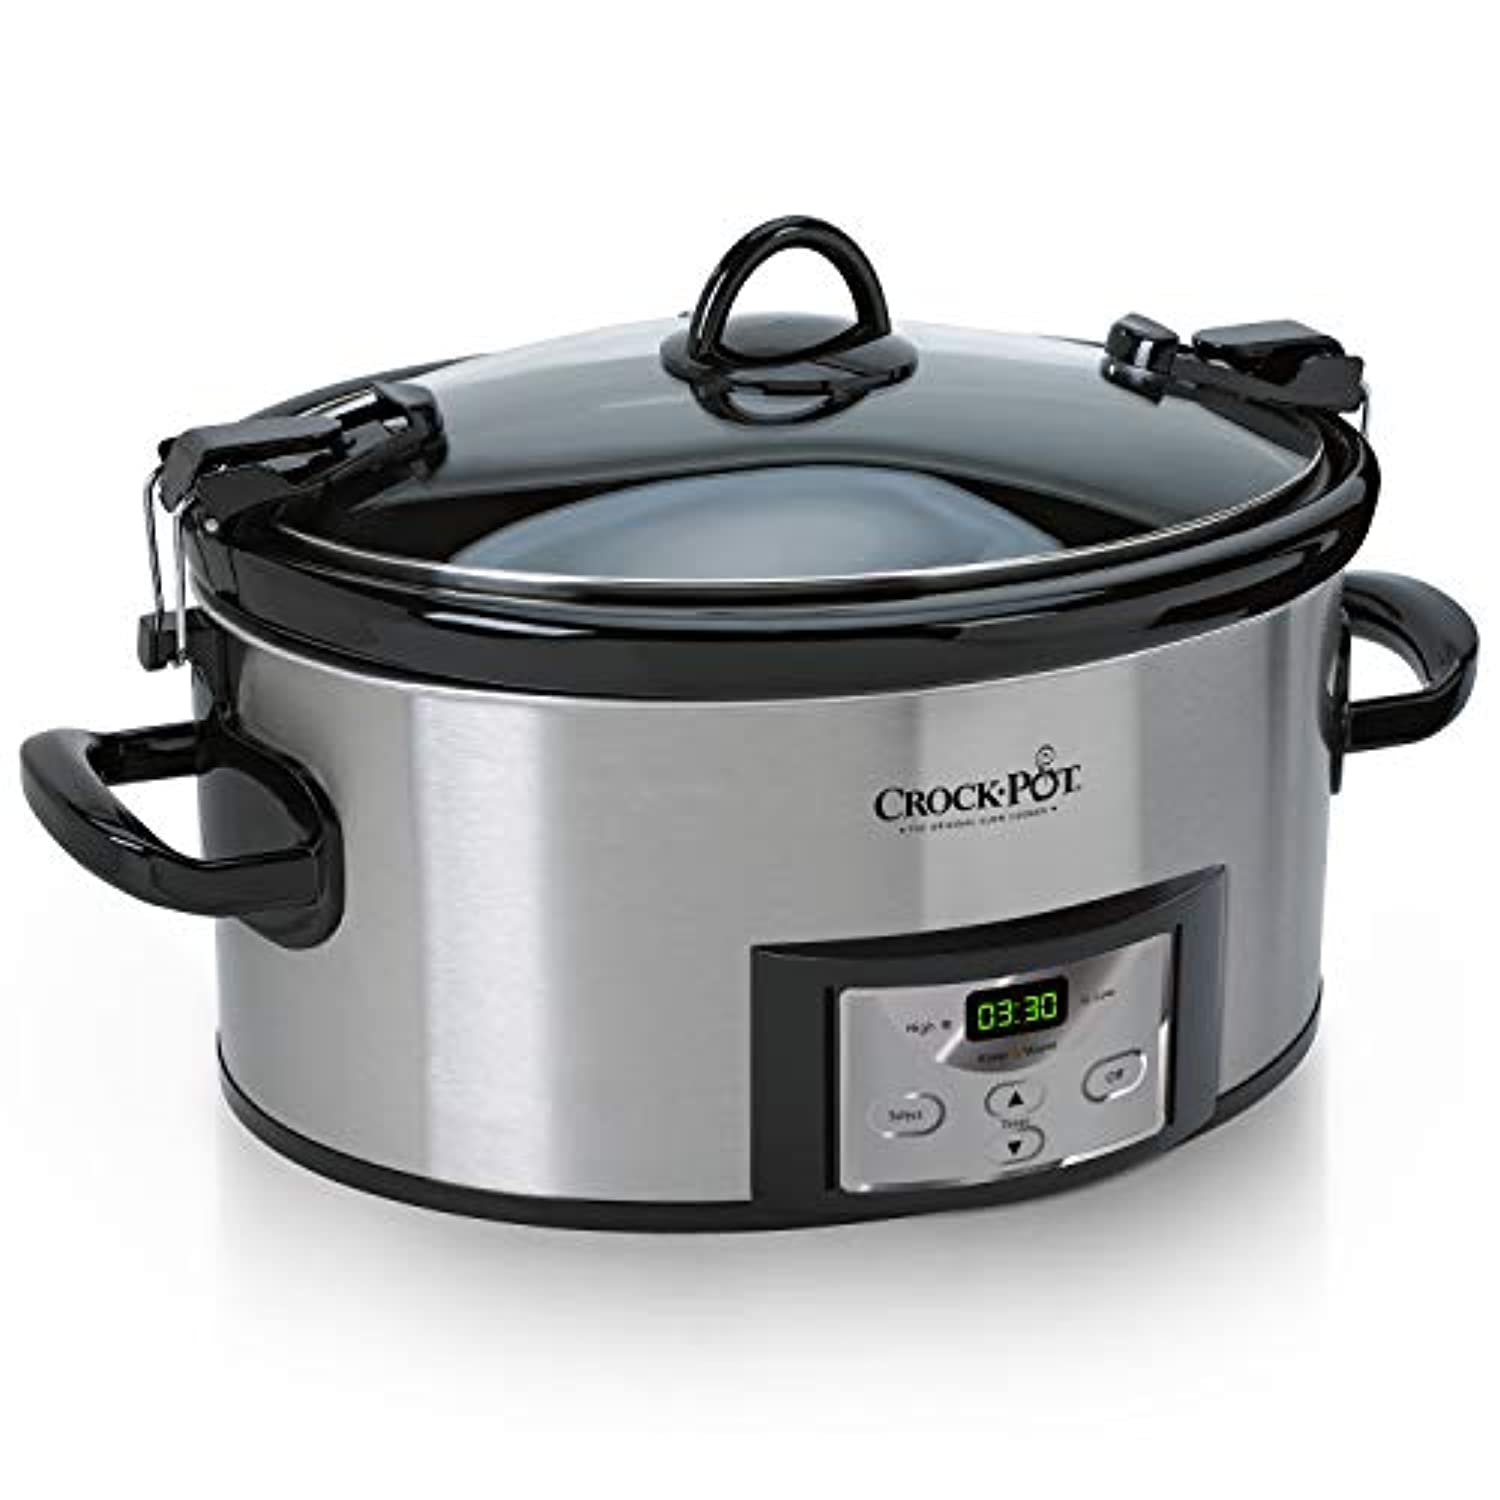 Crux 14681-SN 6 Quart Programmable Slow Cooker with Timer, Black Stainless  Steel 